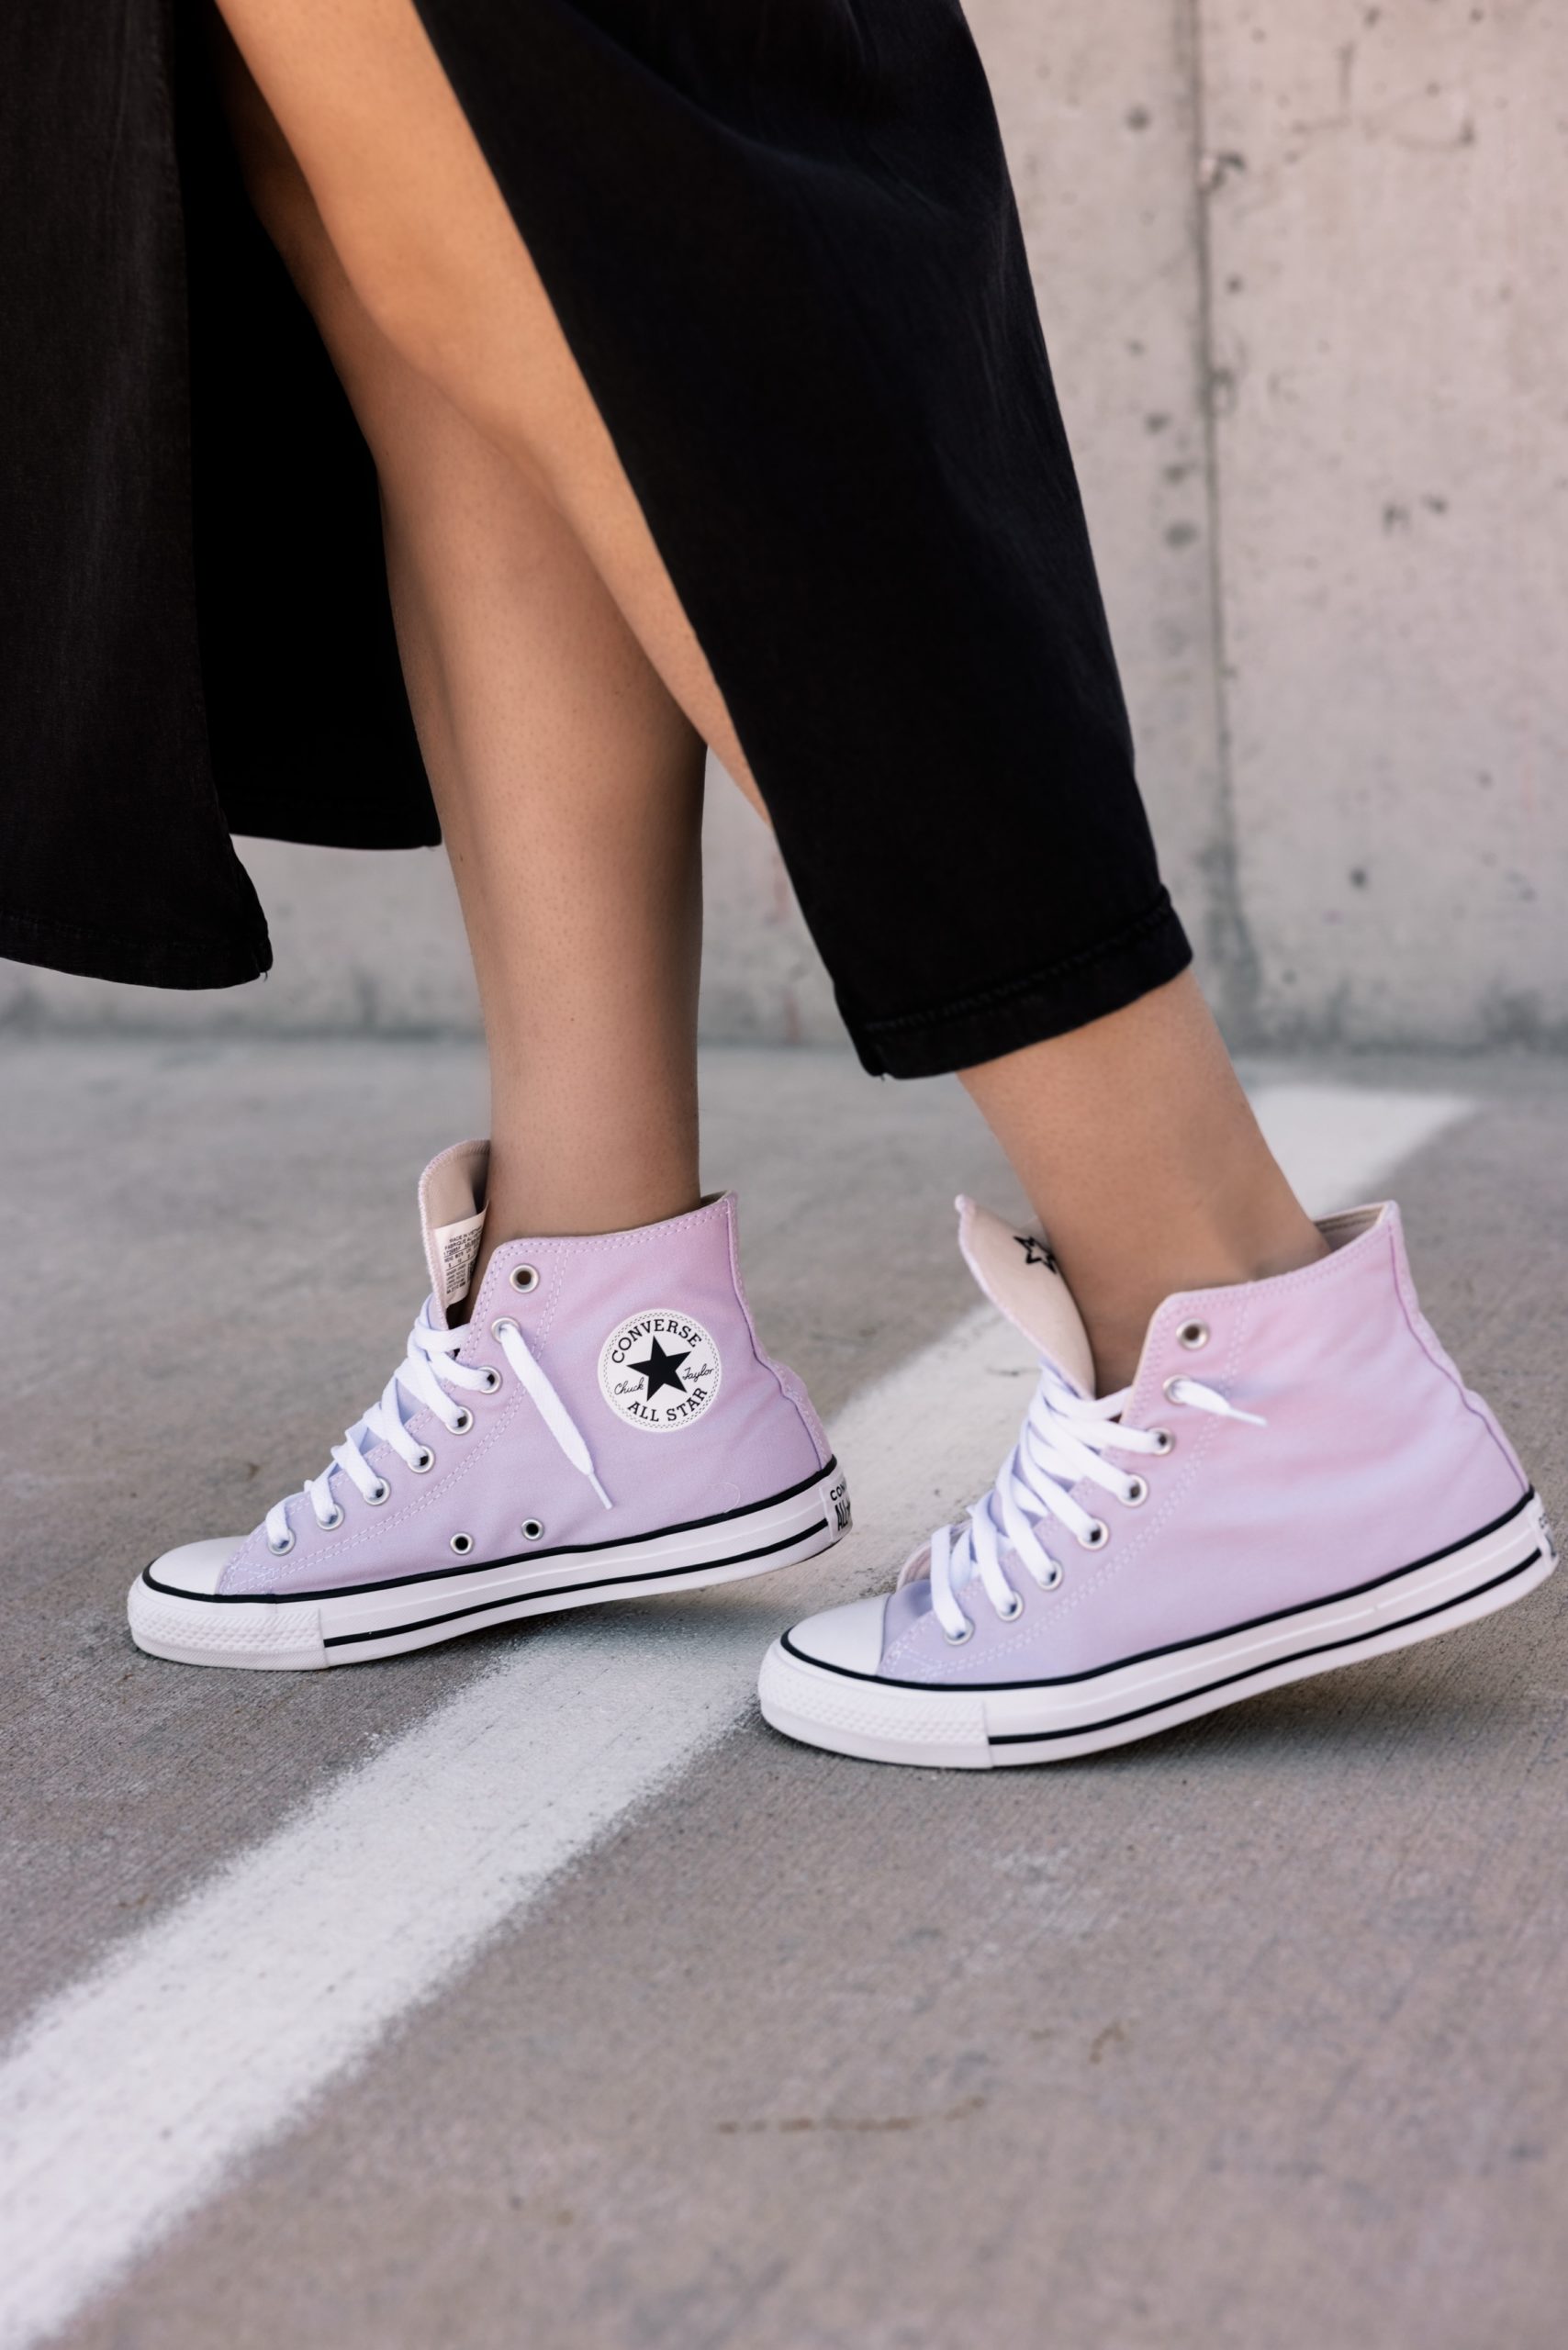 Converse Tops for Spring |